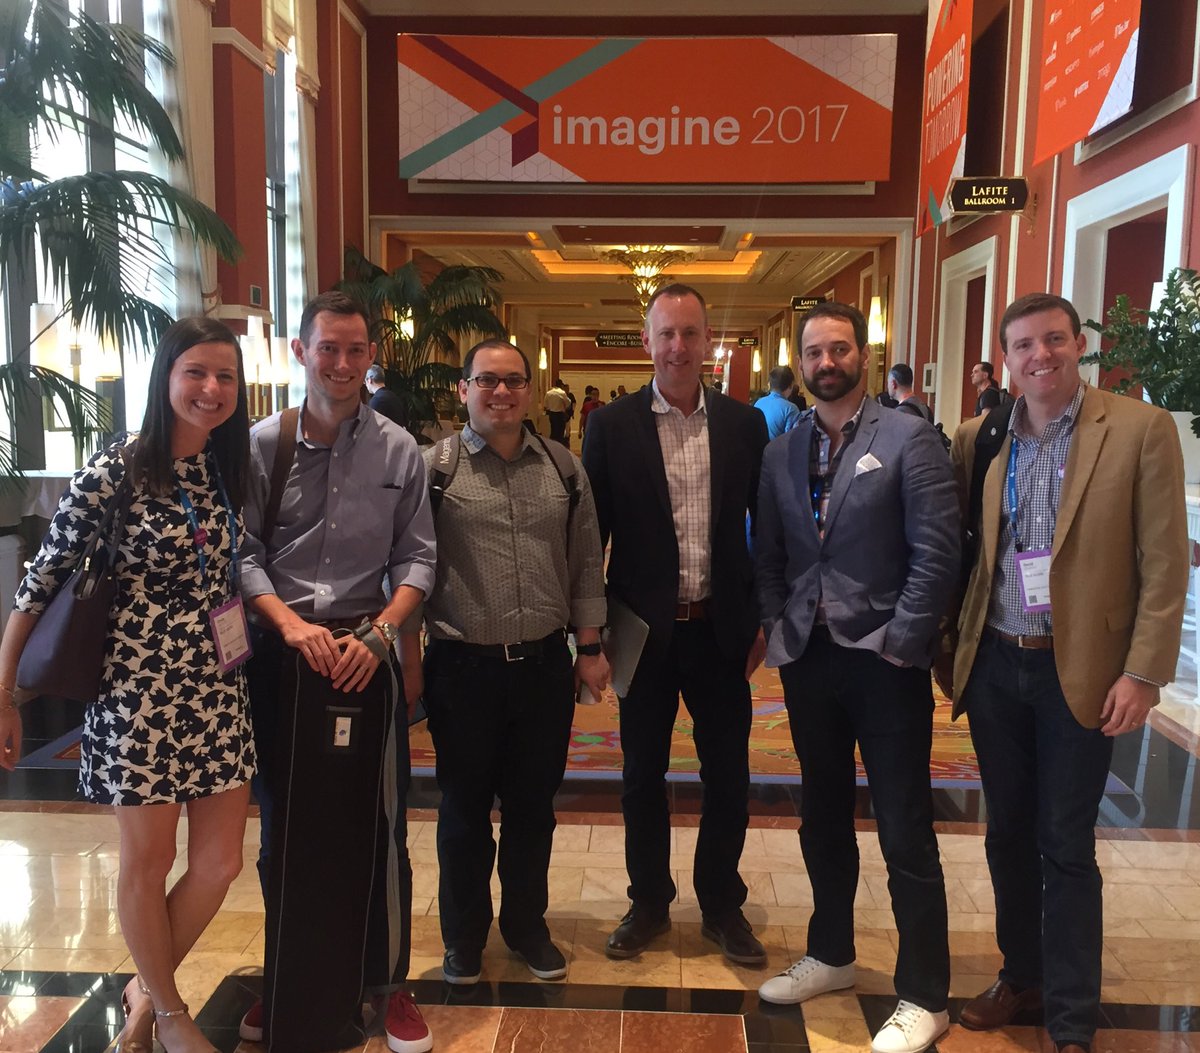 blueacorn: That's a wrap! Another great #Magentoimagine in the books! Thank you @magento for an epic event🎉 https://t.co/jbT9zQ74F6